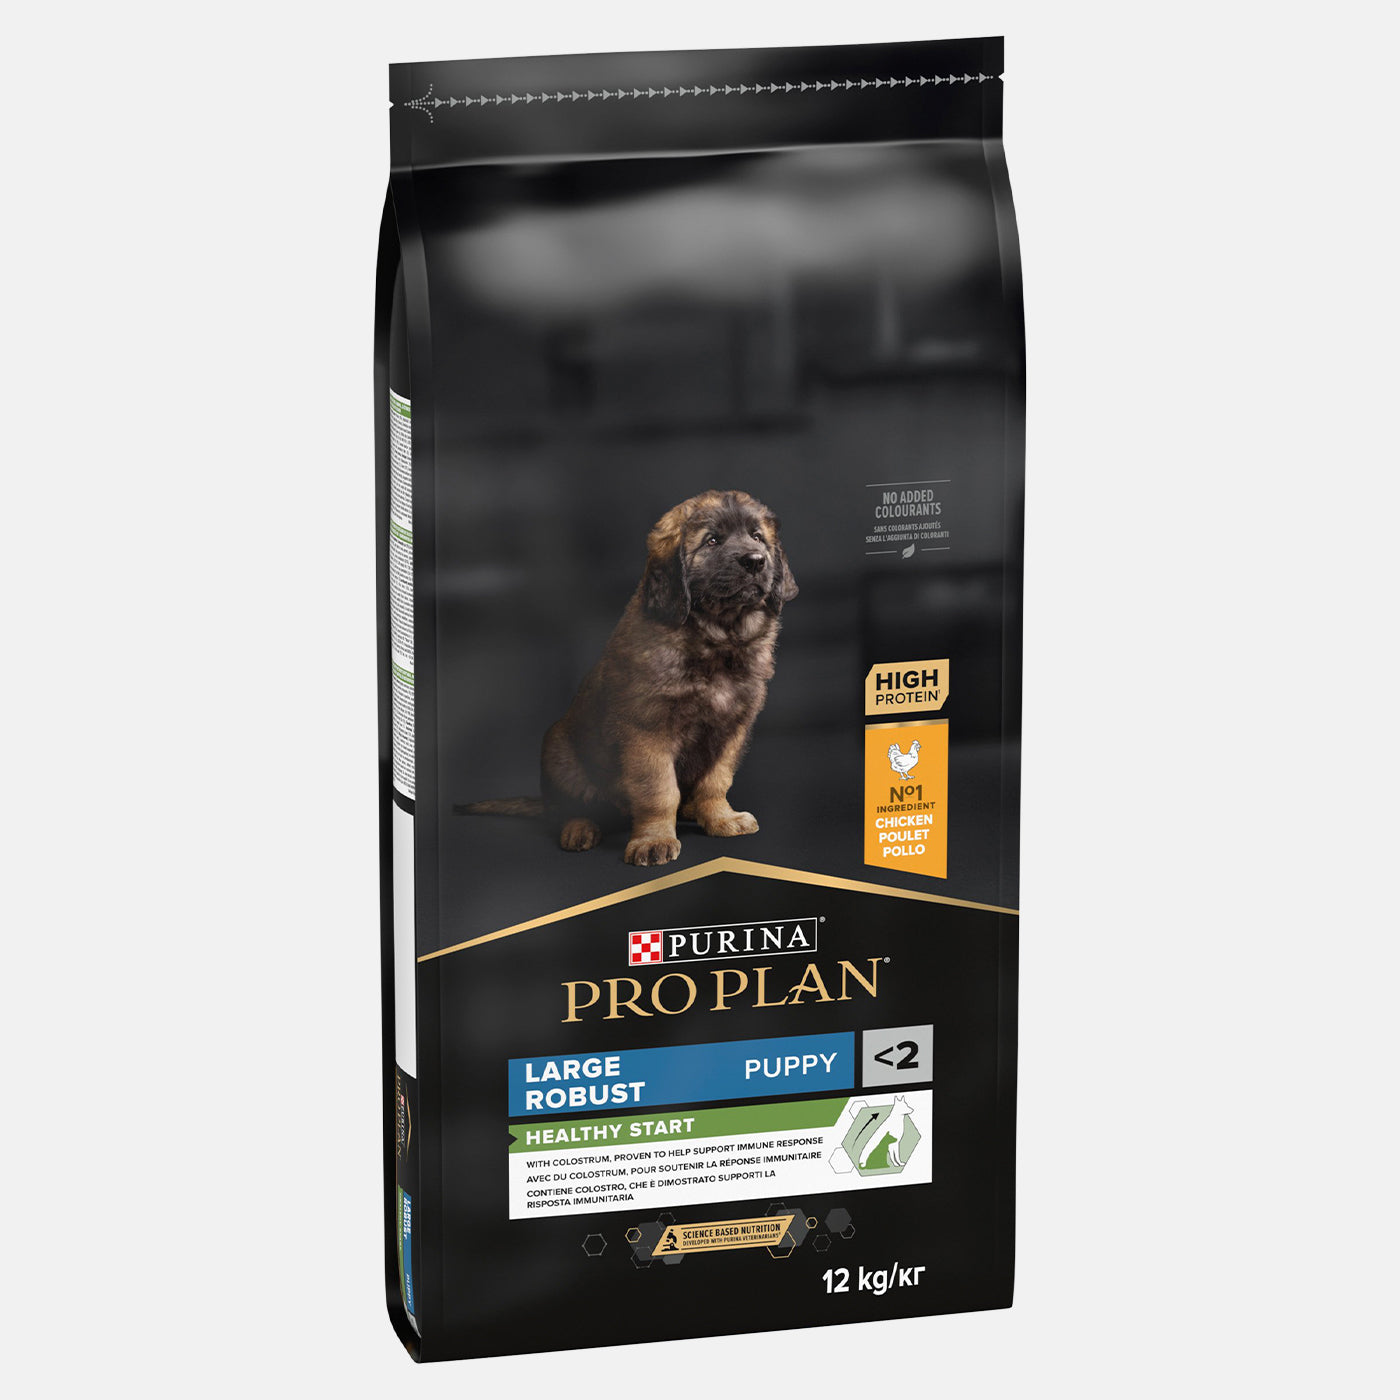 PRO PLAN Dog Large Puppy Robust with Chicken Dry Food